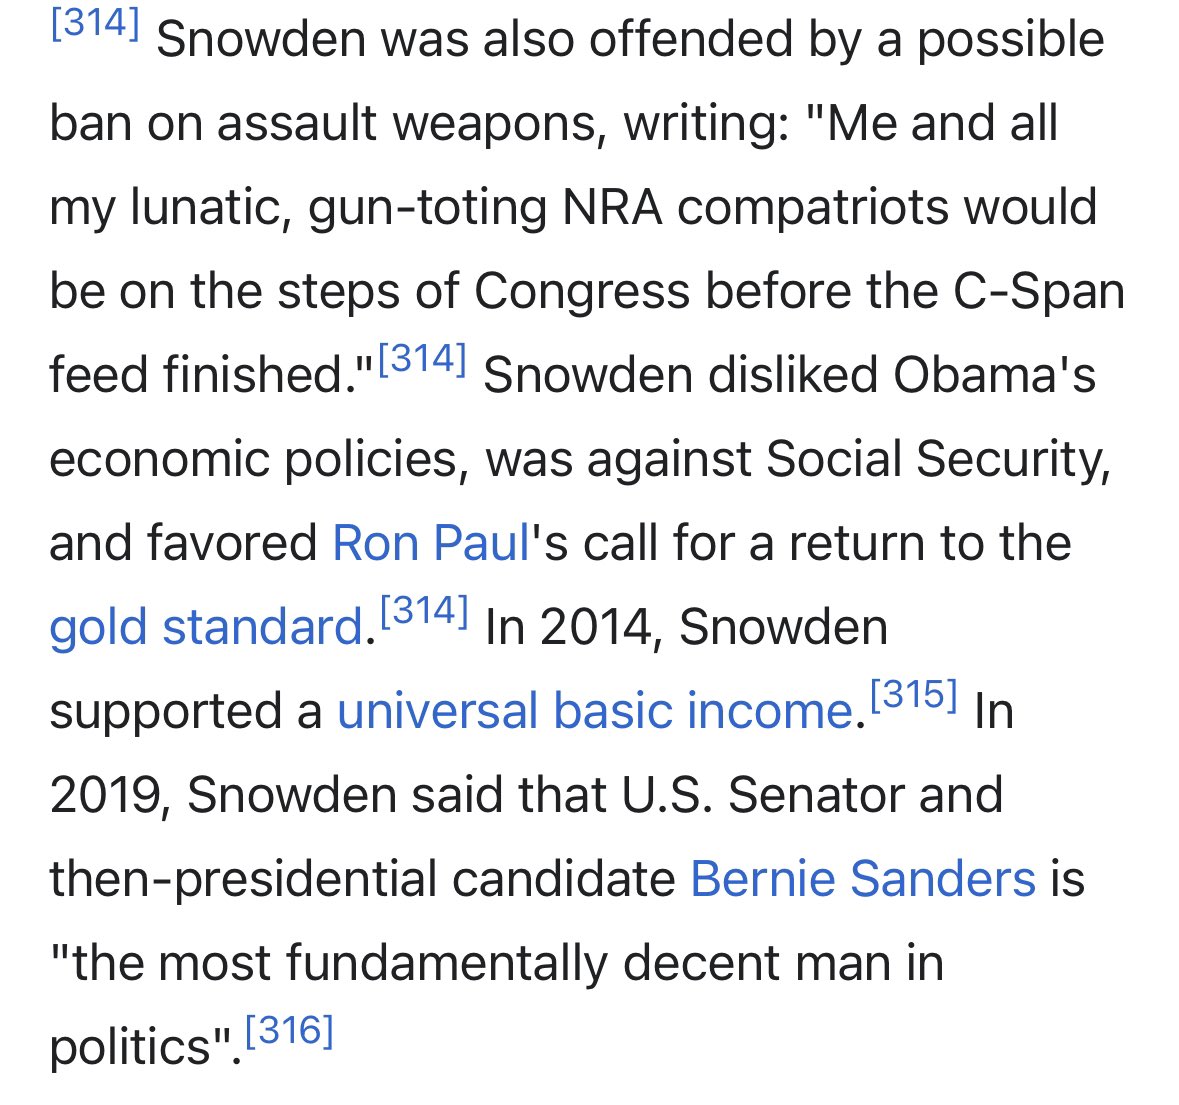 im on ed snowdens wiki page and it’s kinda wild but not that surprising how the trajectory of his political views for over a decade just directly coincides with what all the loudest guys on reddit believed in each era